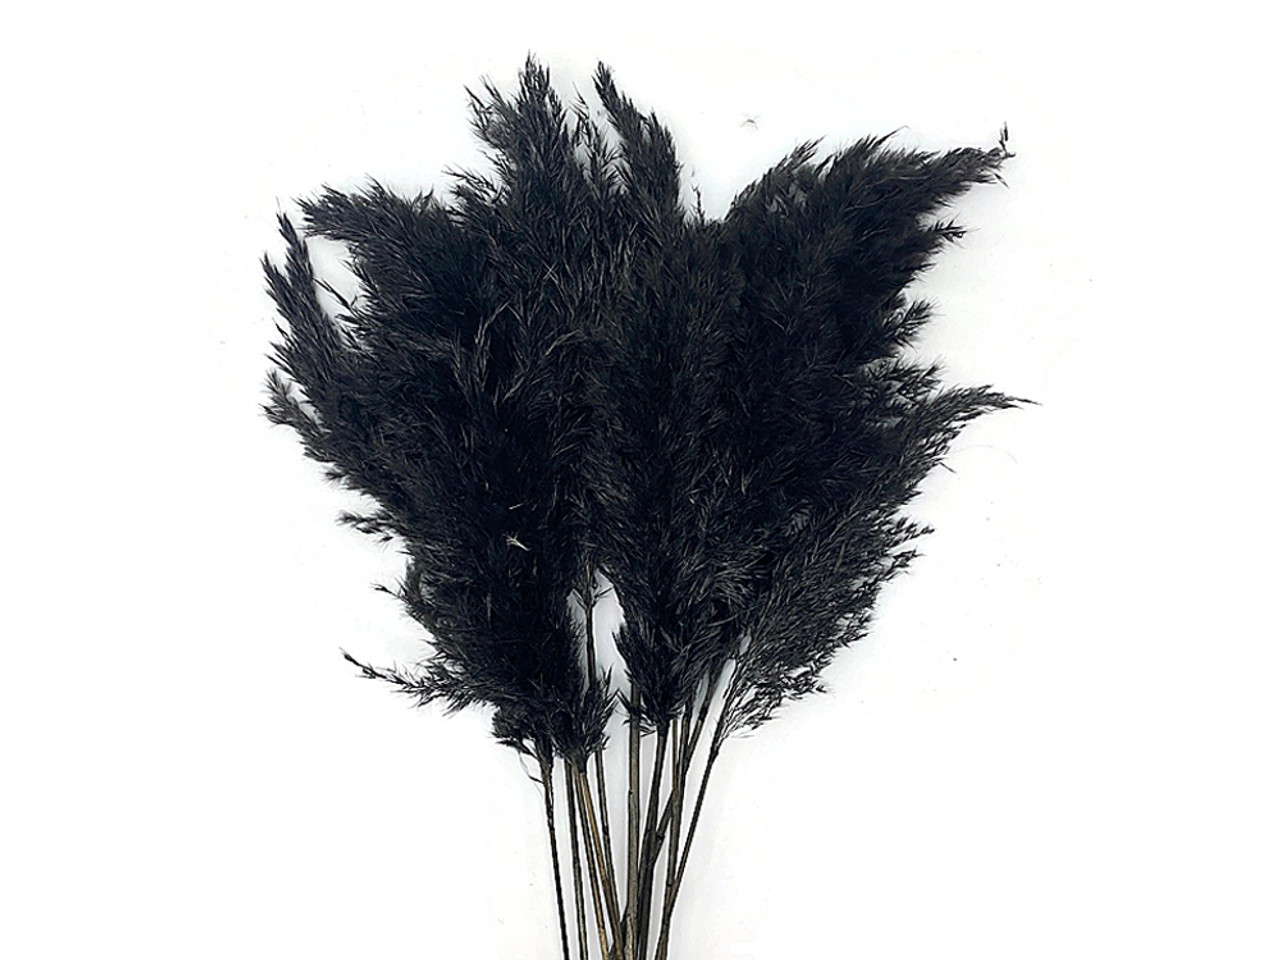 5 Pieces - 18-20 Dyed Black Preserved Dried Plume Pampas Reed Grass